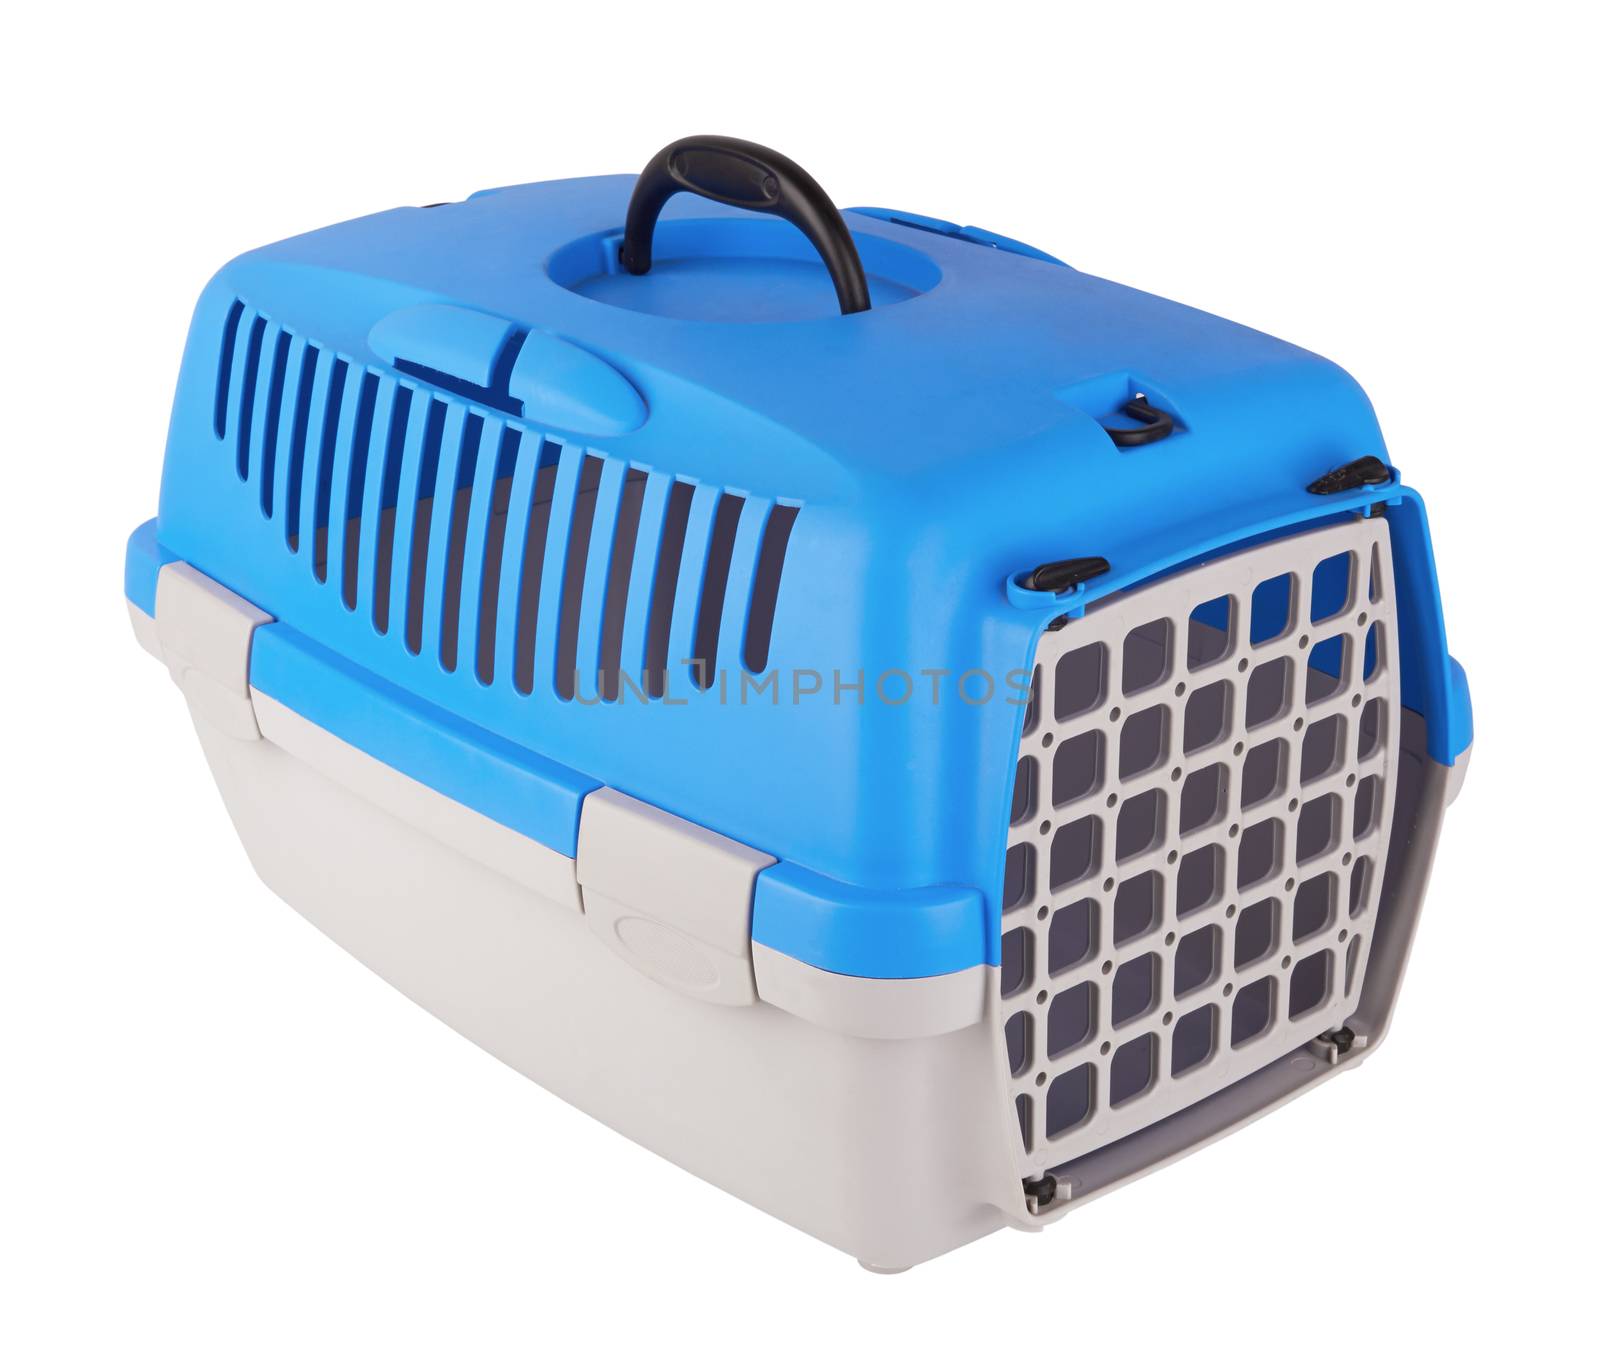 Cage for transporting pets by pioneer111